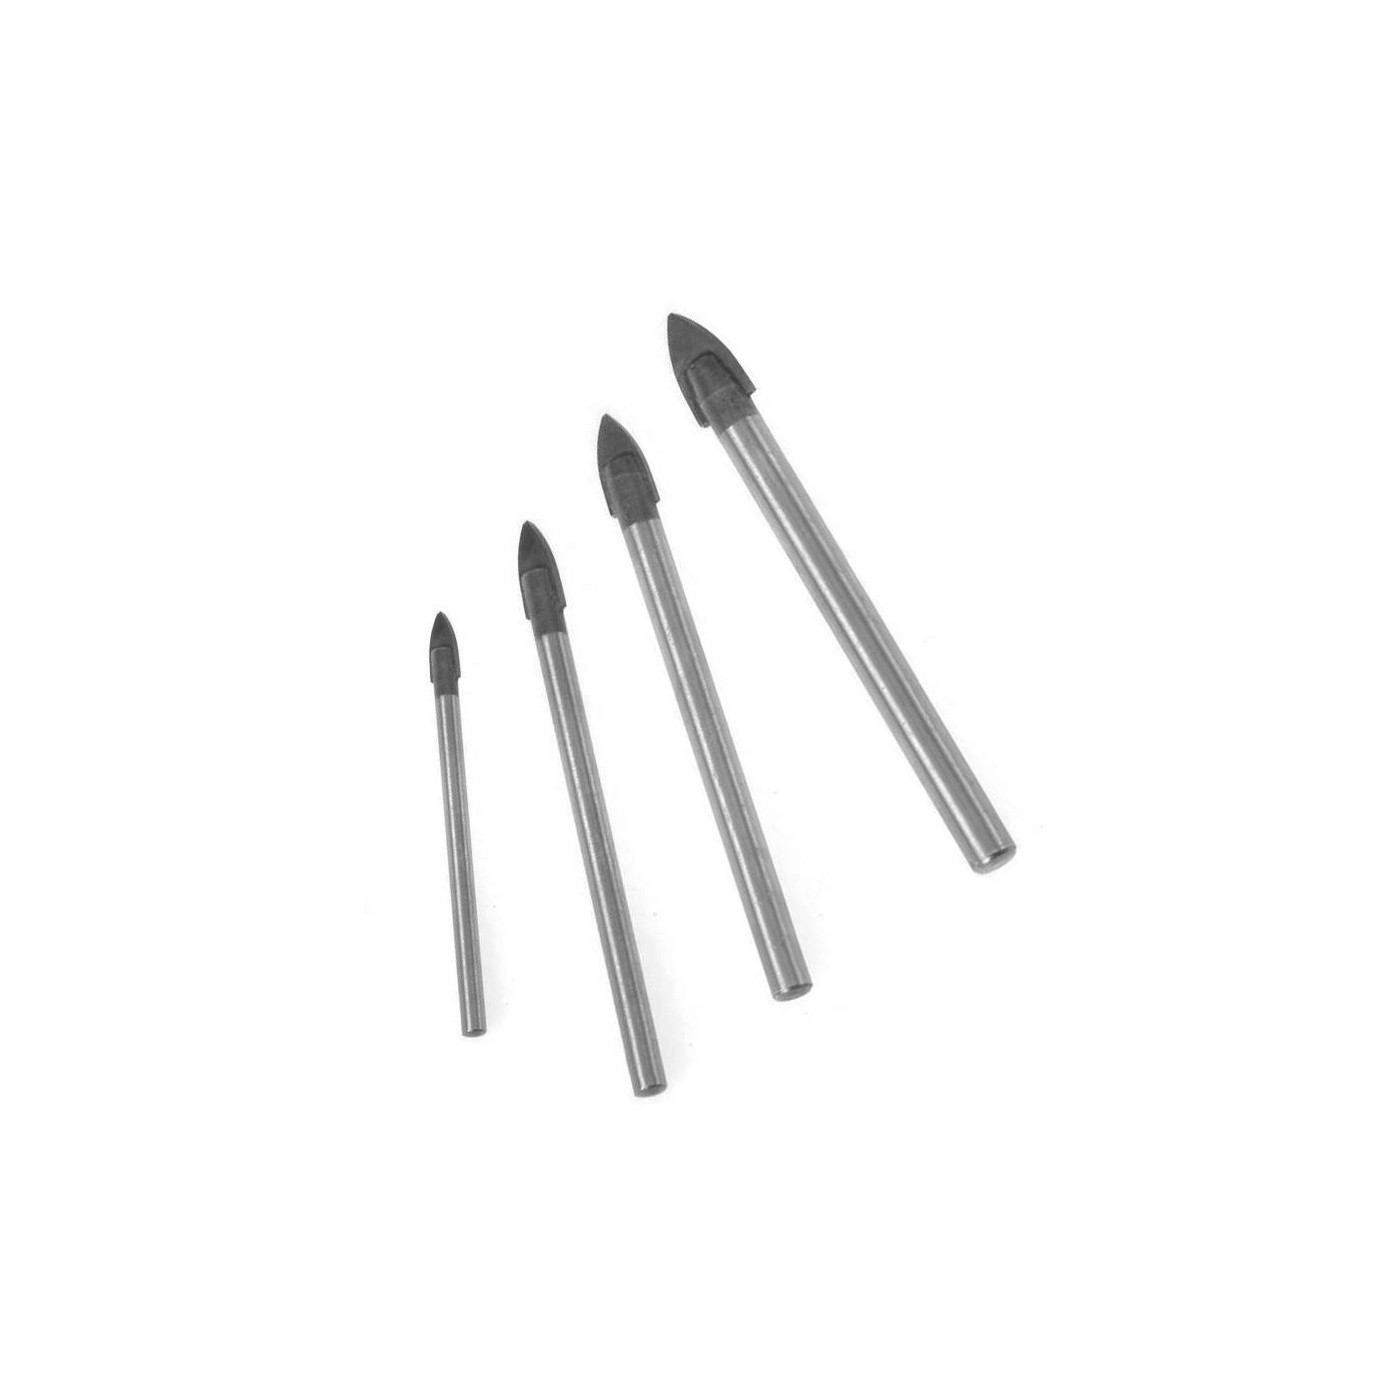 Set of 4 glass, tile, mirror drill bits (3, 5, 6, 8 mm)